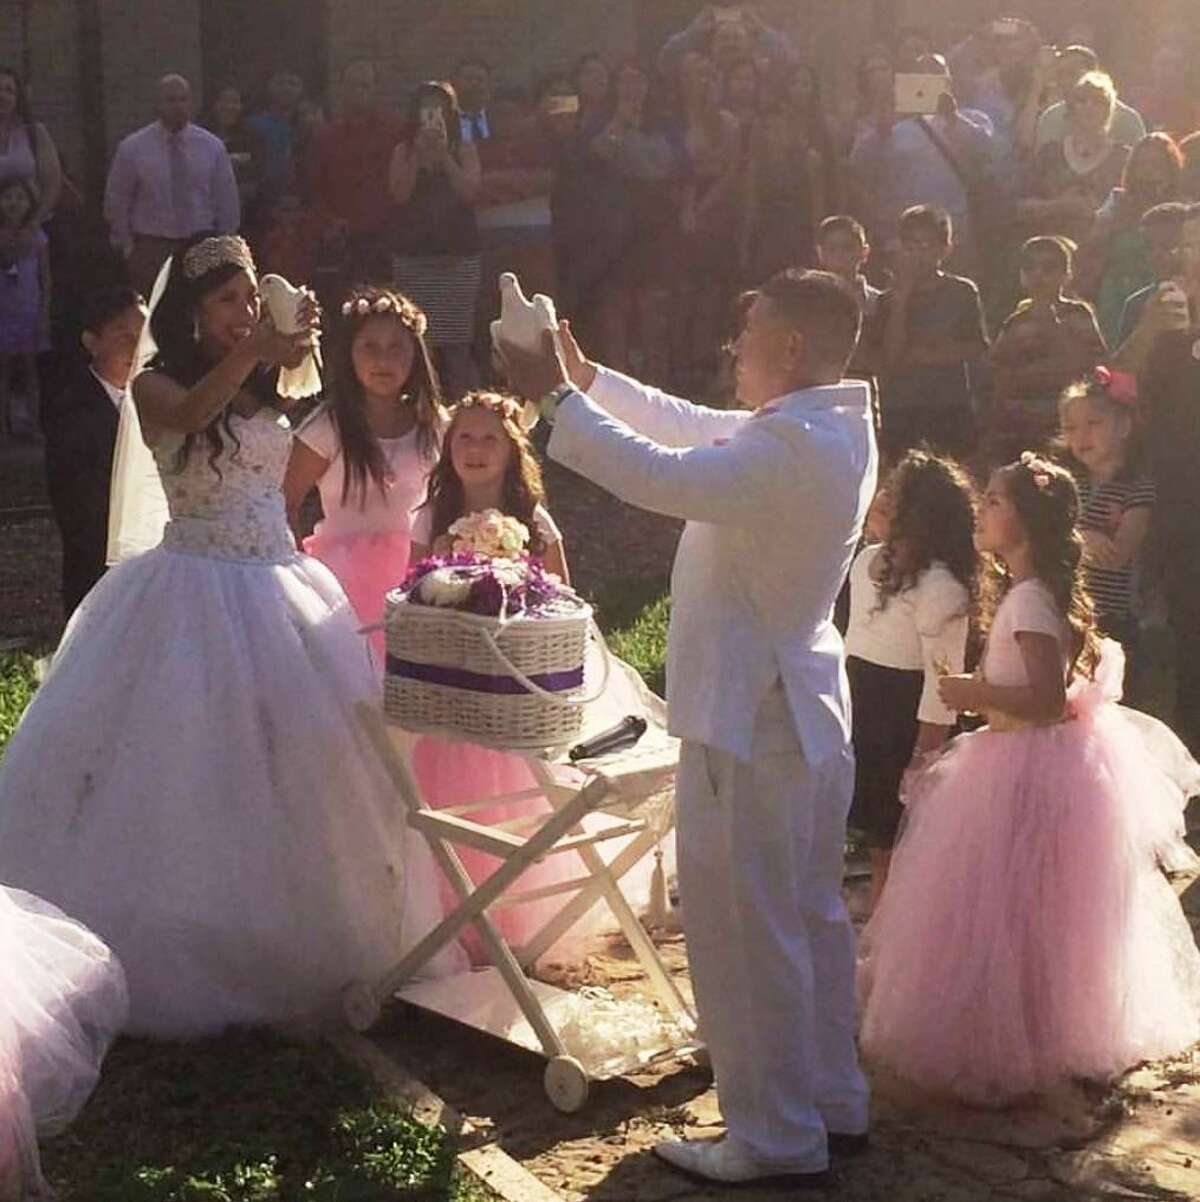 Lisa and Travis Luce prepare to release pigeons during their August 2016 wedding. The couple used the crowdfunding website GoFundMe to help pay for the wedding.